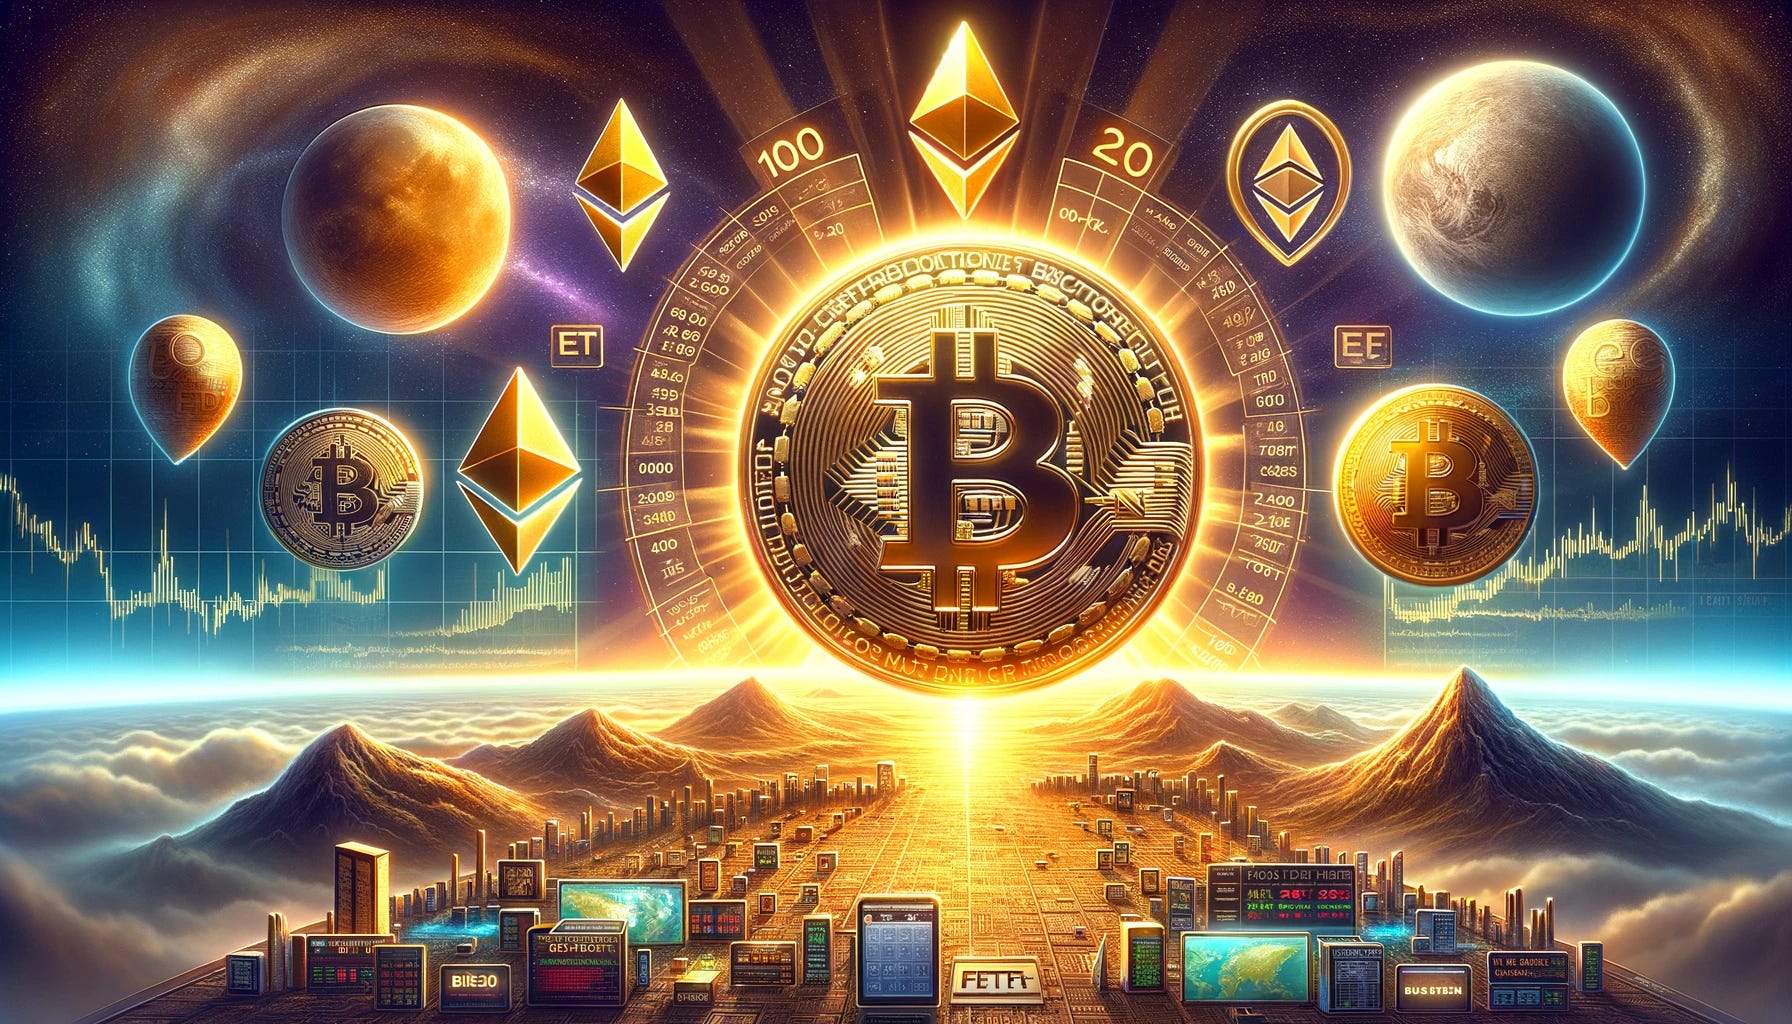 A digital art piece in landscape orientation, representing the theme of the beginning of a crypto bull cycle, focusing on Bitcoin. The image features a large, golden Bitcoin symbol prominently in the center, surrounded by smaller, shining ETF symbols, symbolizing the recent SEC approvals. In the background, a calendar counting down 100 days, representing the anticipation of the Bitcoin halving. Ethereum symbols and other layer 2 protocol icons are positioned in the lower part of the image, contrasting with the dominant Bitcoin symbol. Above the Bitcoin symbol, an illustration of the BRC-20 token and the name 'KoiPond' float, hinting at the future of Bitcoin through BRC-20 token launches. The overall tone is futuristic and optimistic, reflecting the potential market growth and the evolving landscape of cryptocurrencies. The layout is adapted to a wider perspective to enhance the narrative visually.